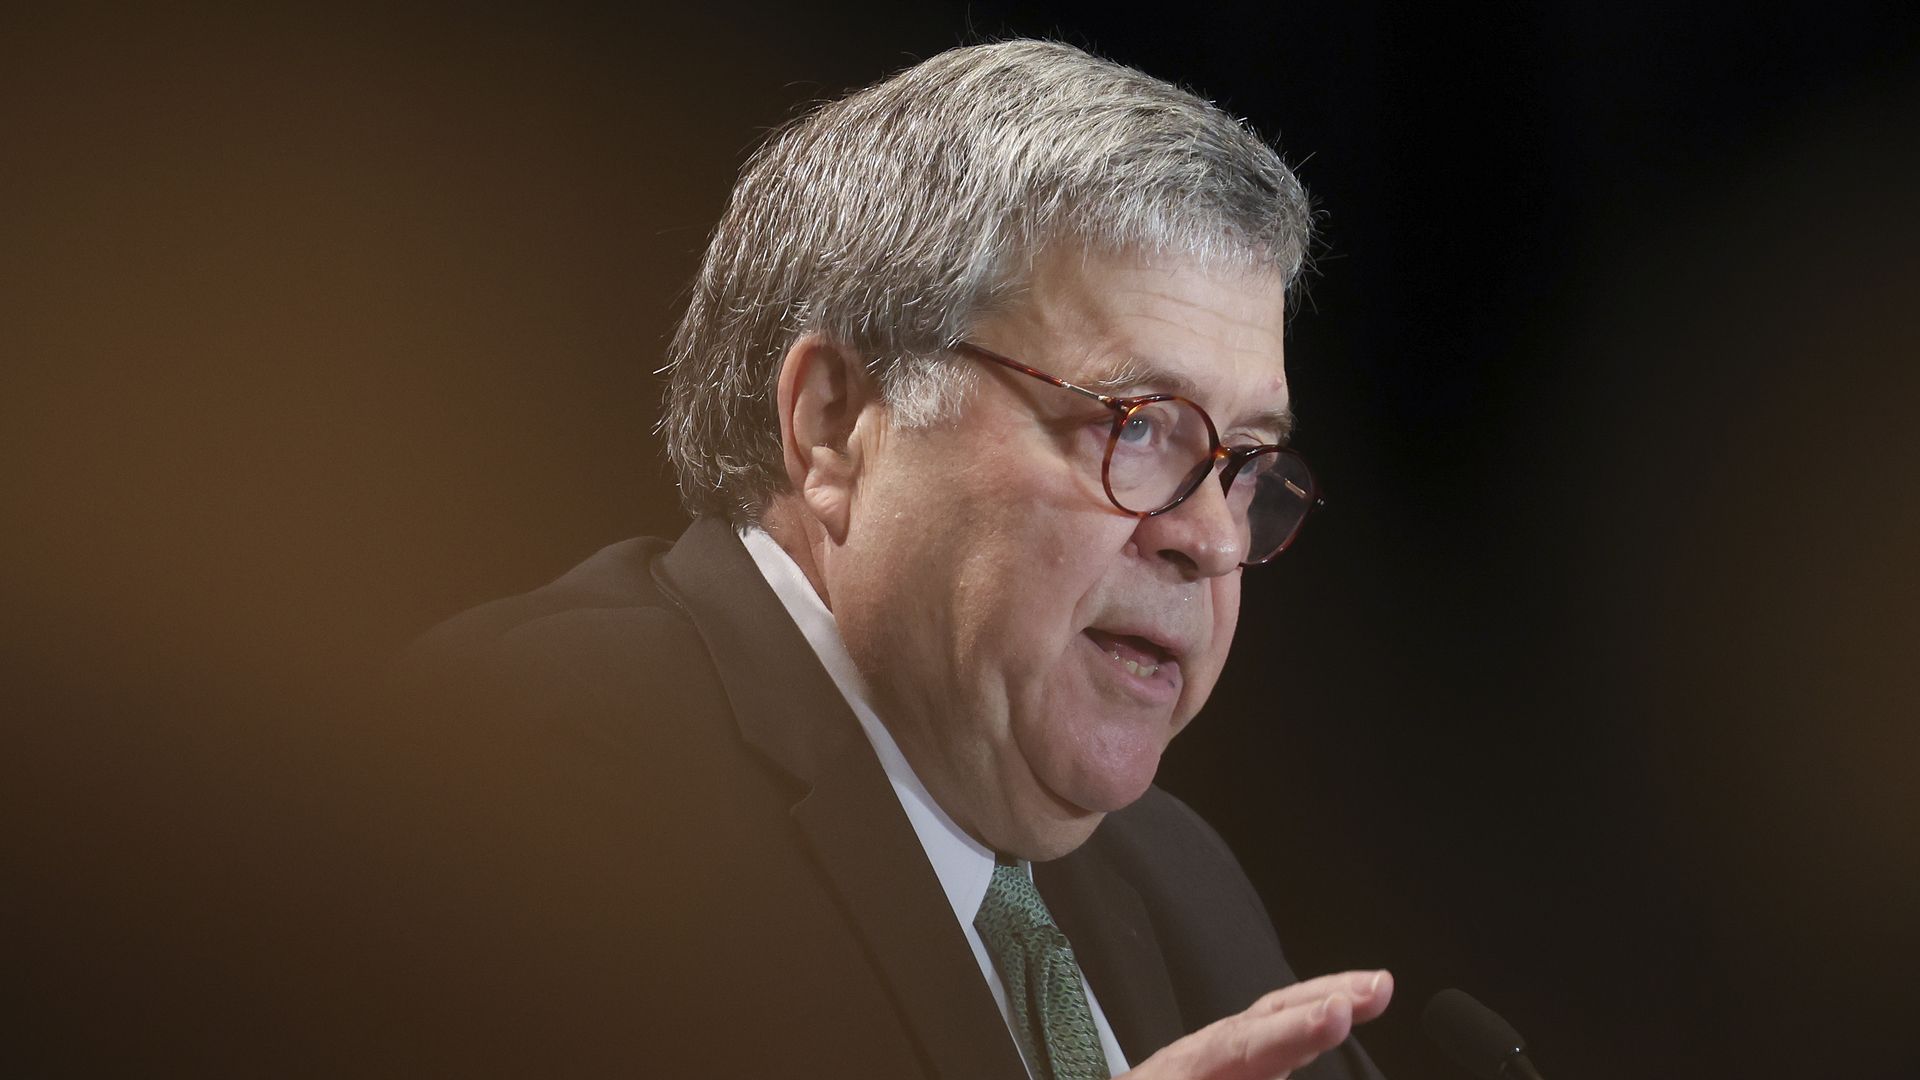 Former U.S. Attorney General William Barr speaks at a meeting of the Federalist Society on September 20, 2022